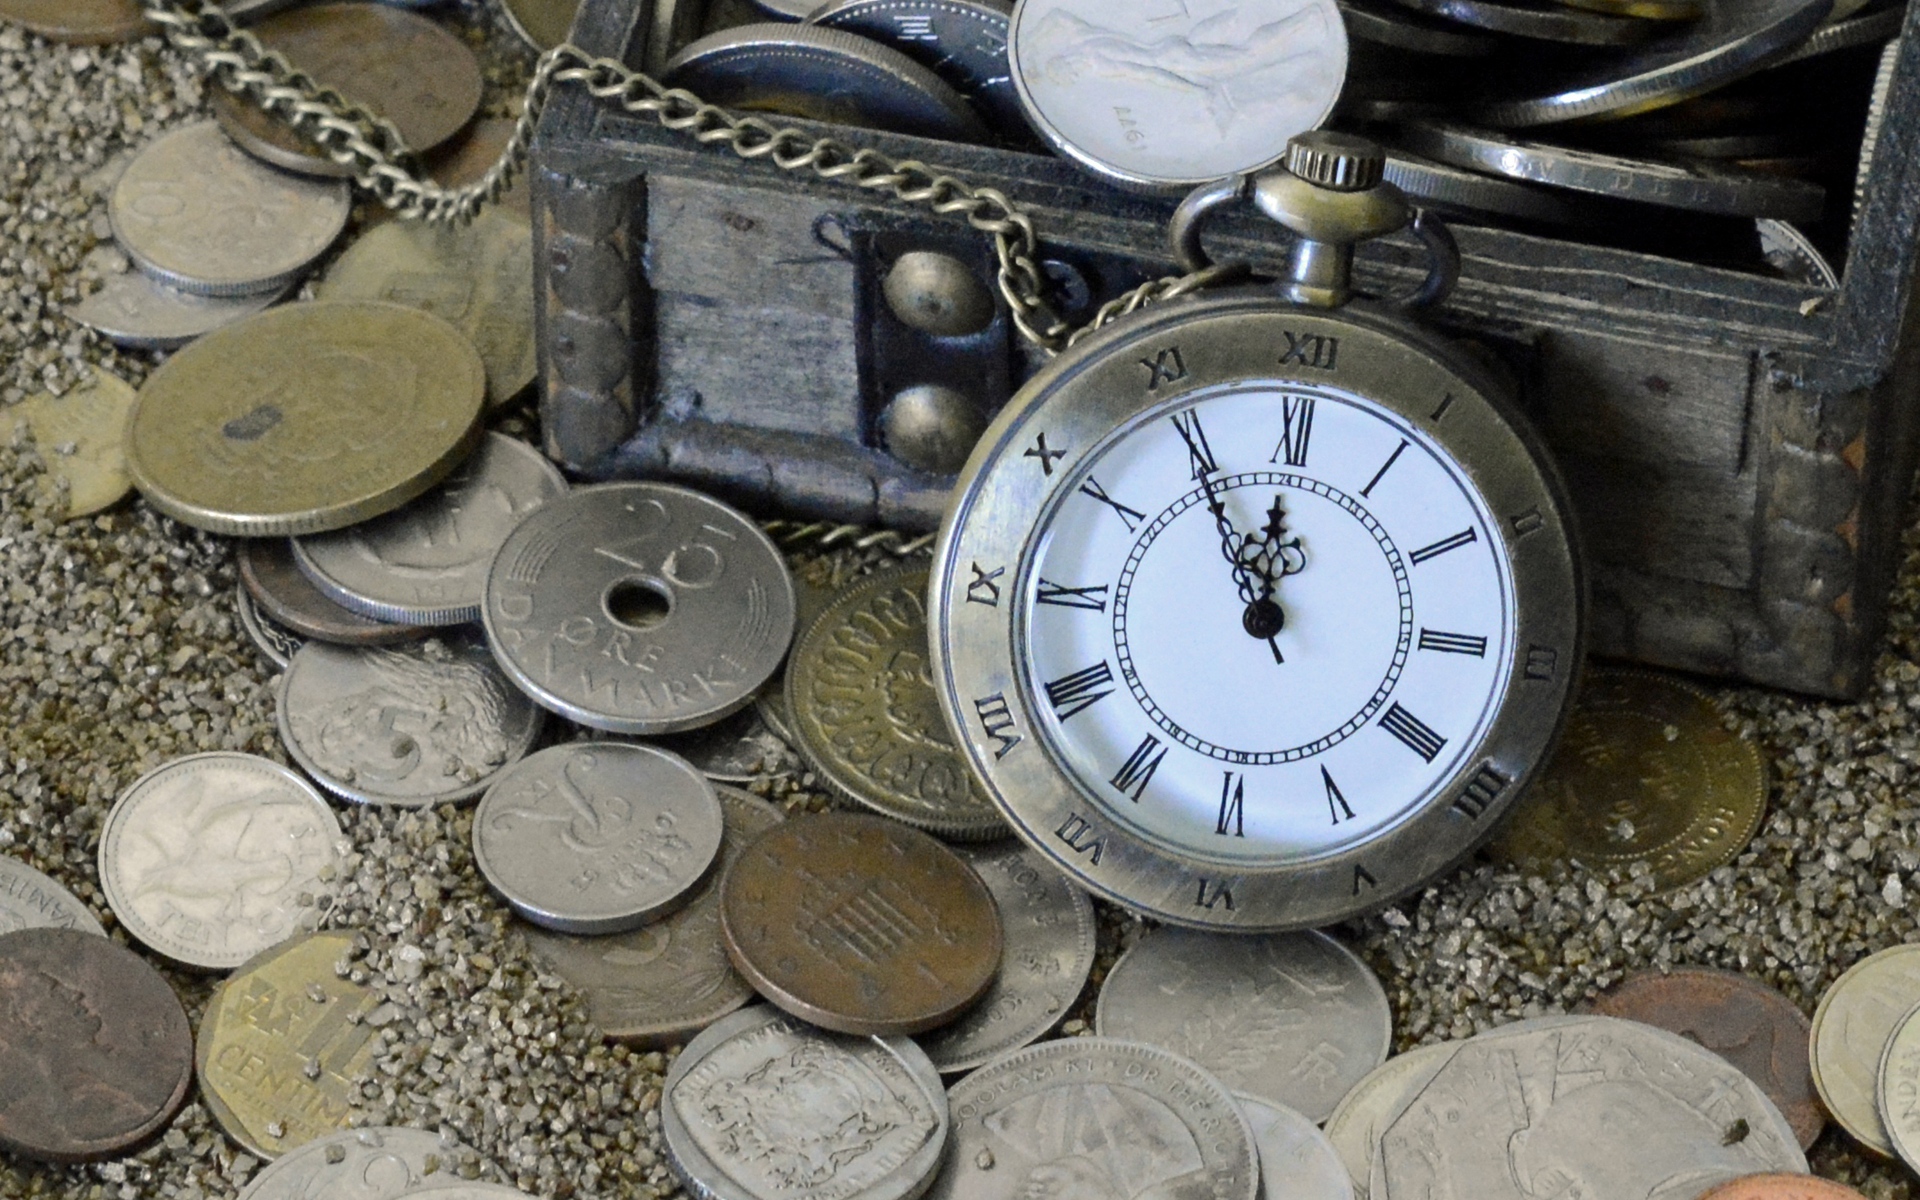 Many coins and pocket watch in the sand